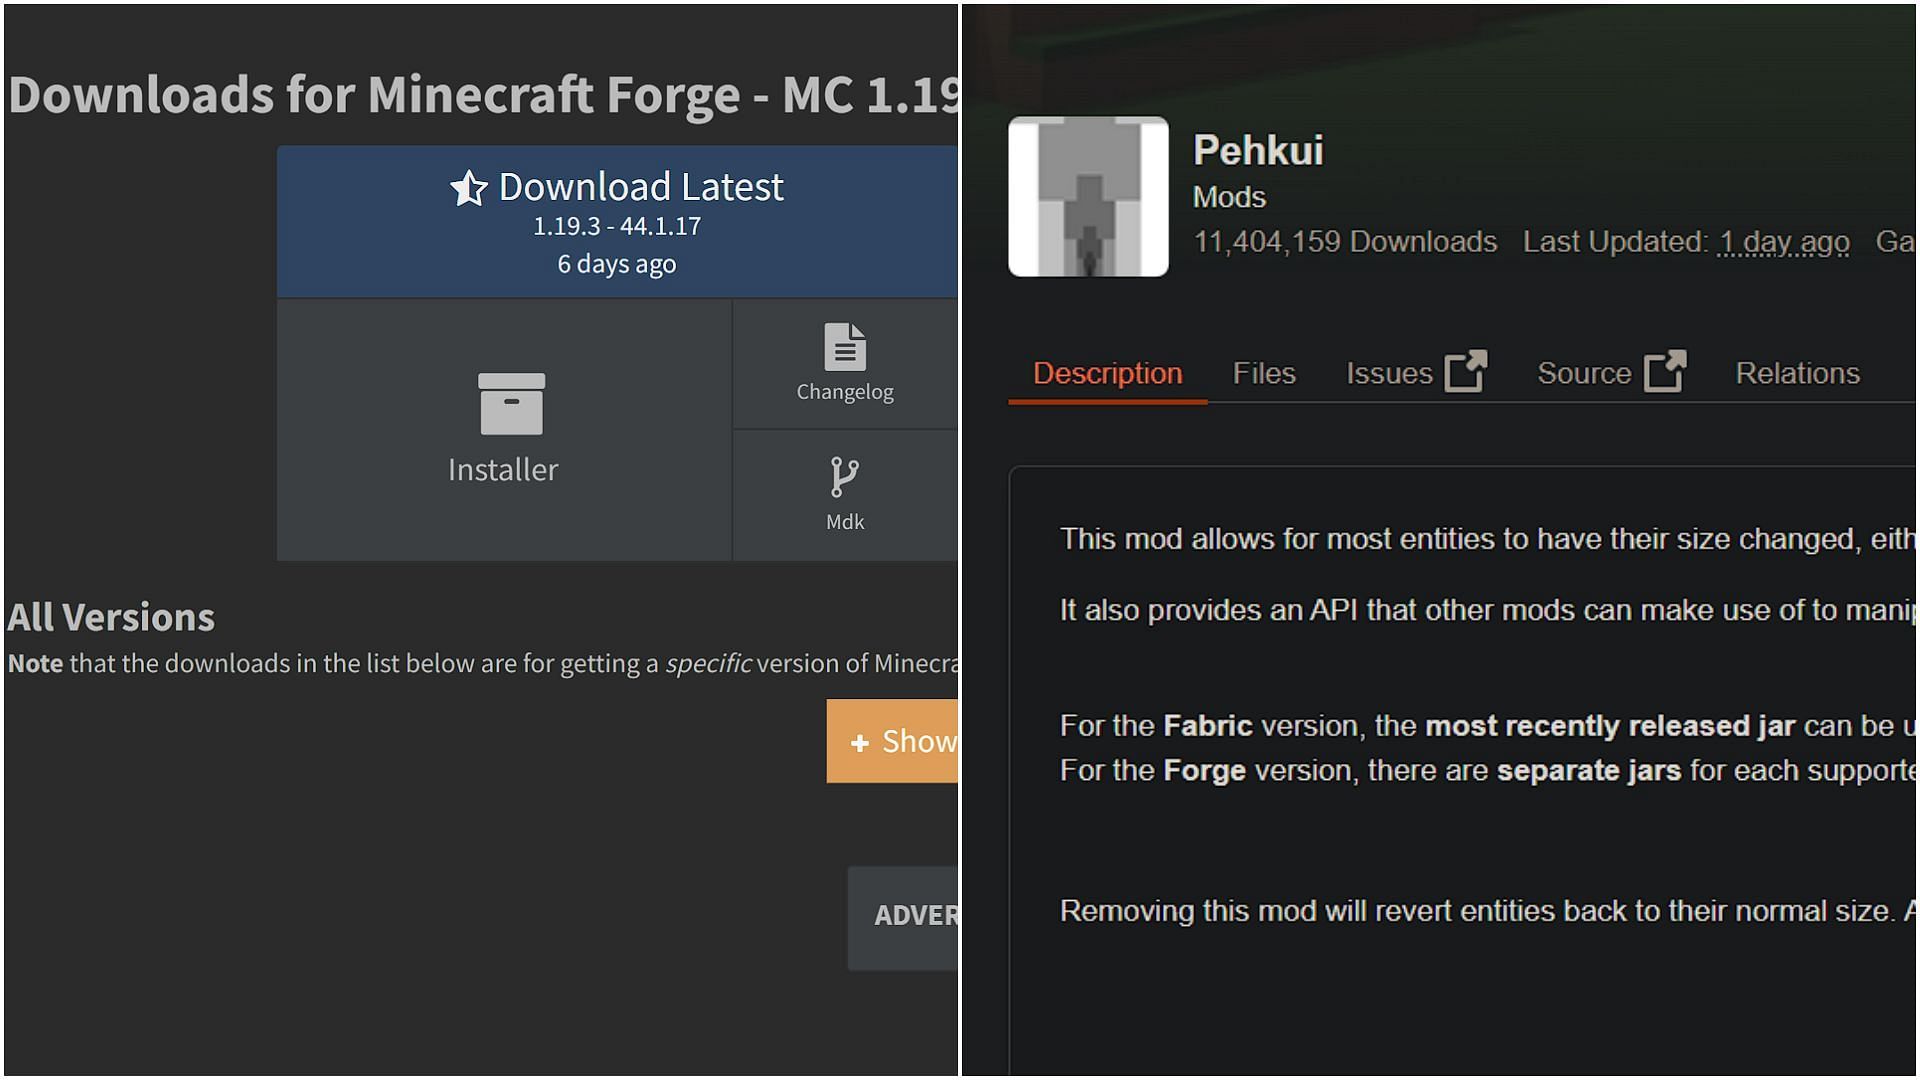 Download Forge API from their official website and the mod from CurseForge website for Minecraft (Image via Sportskeeda)